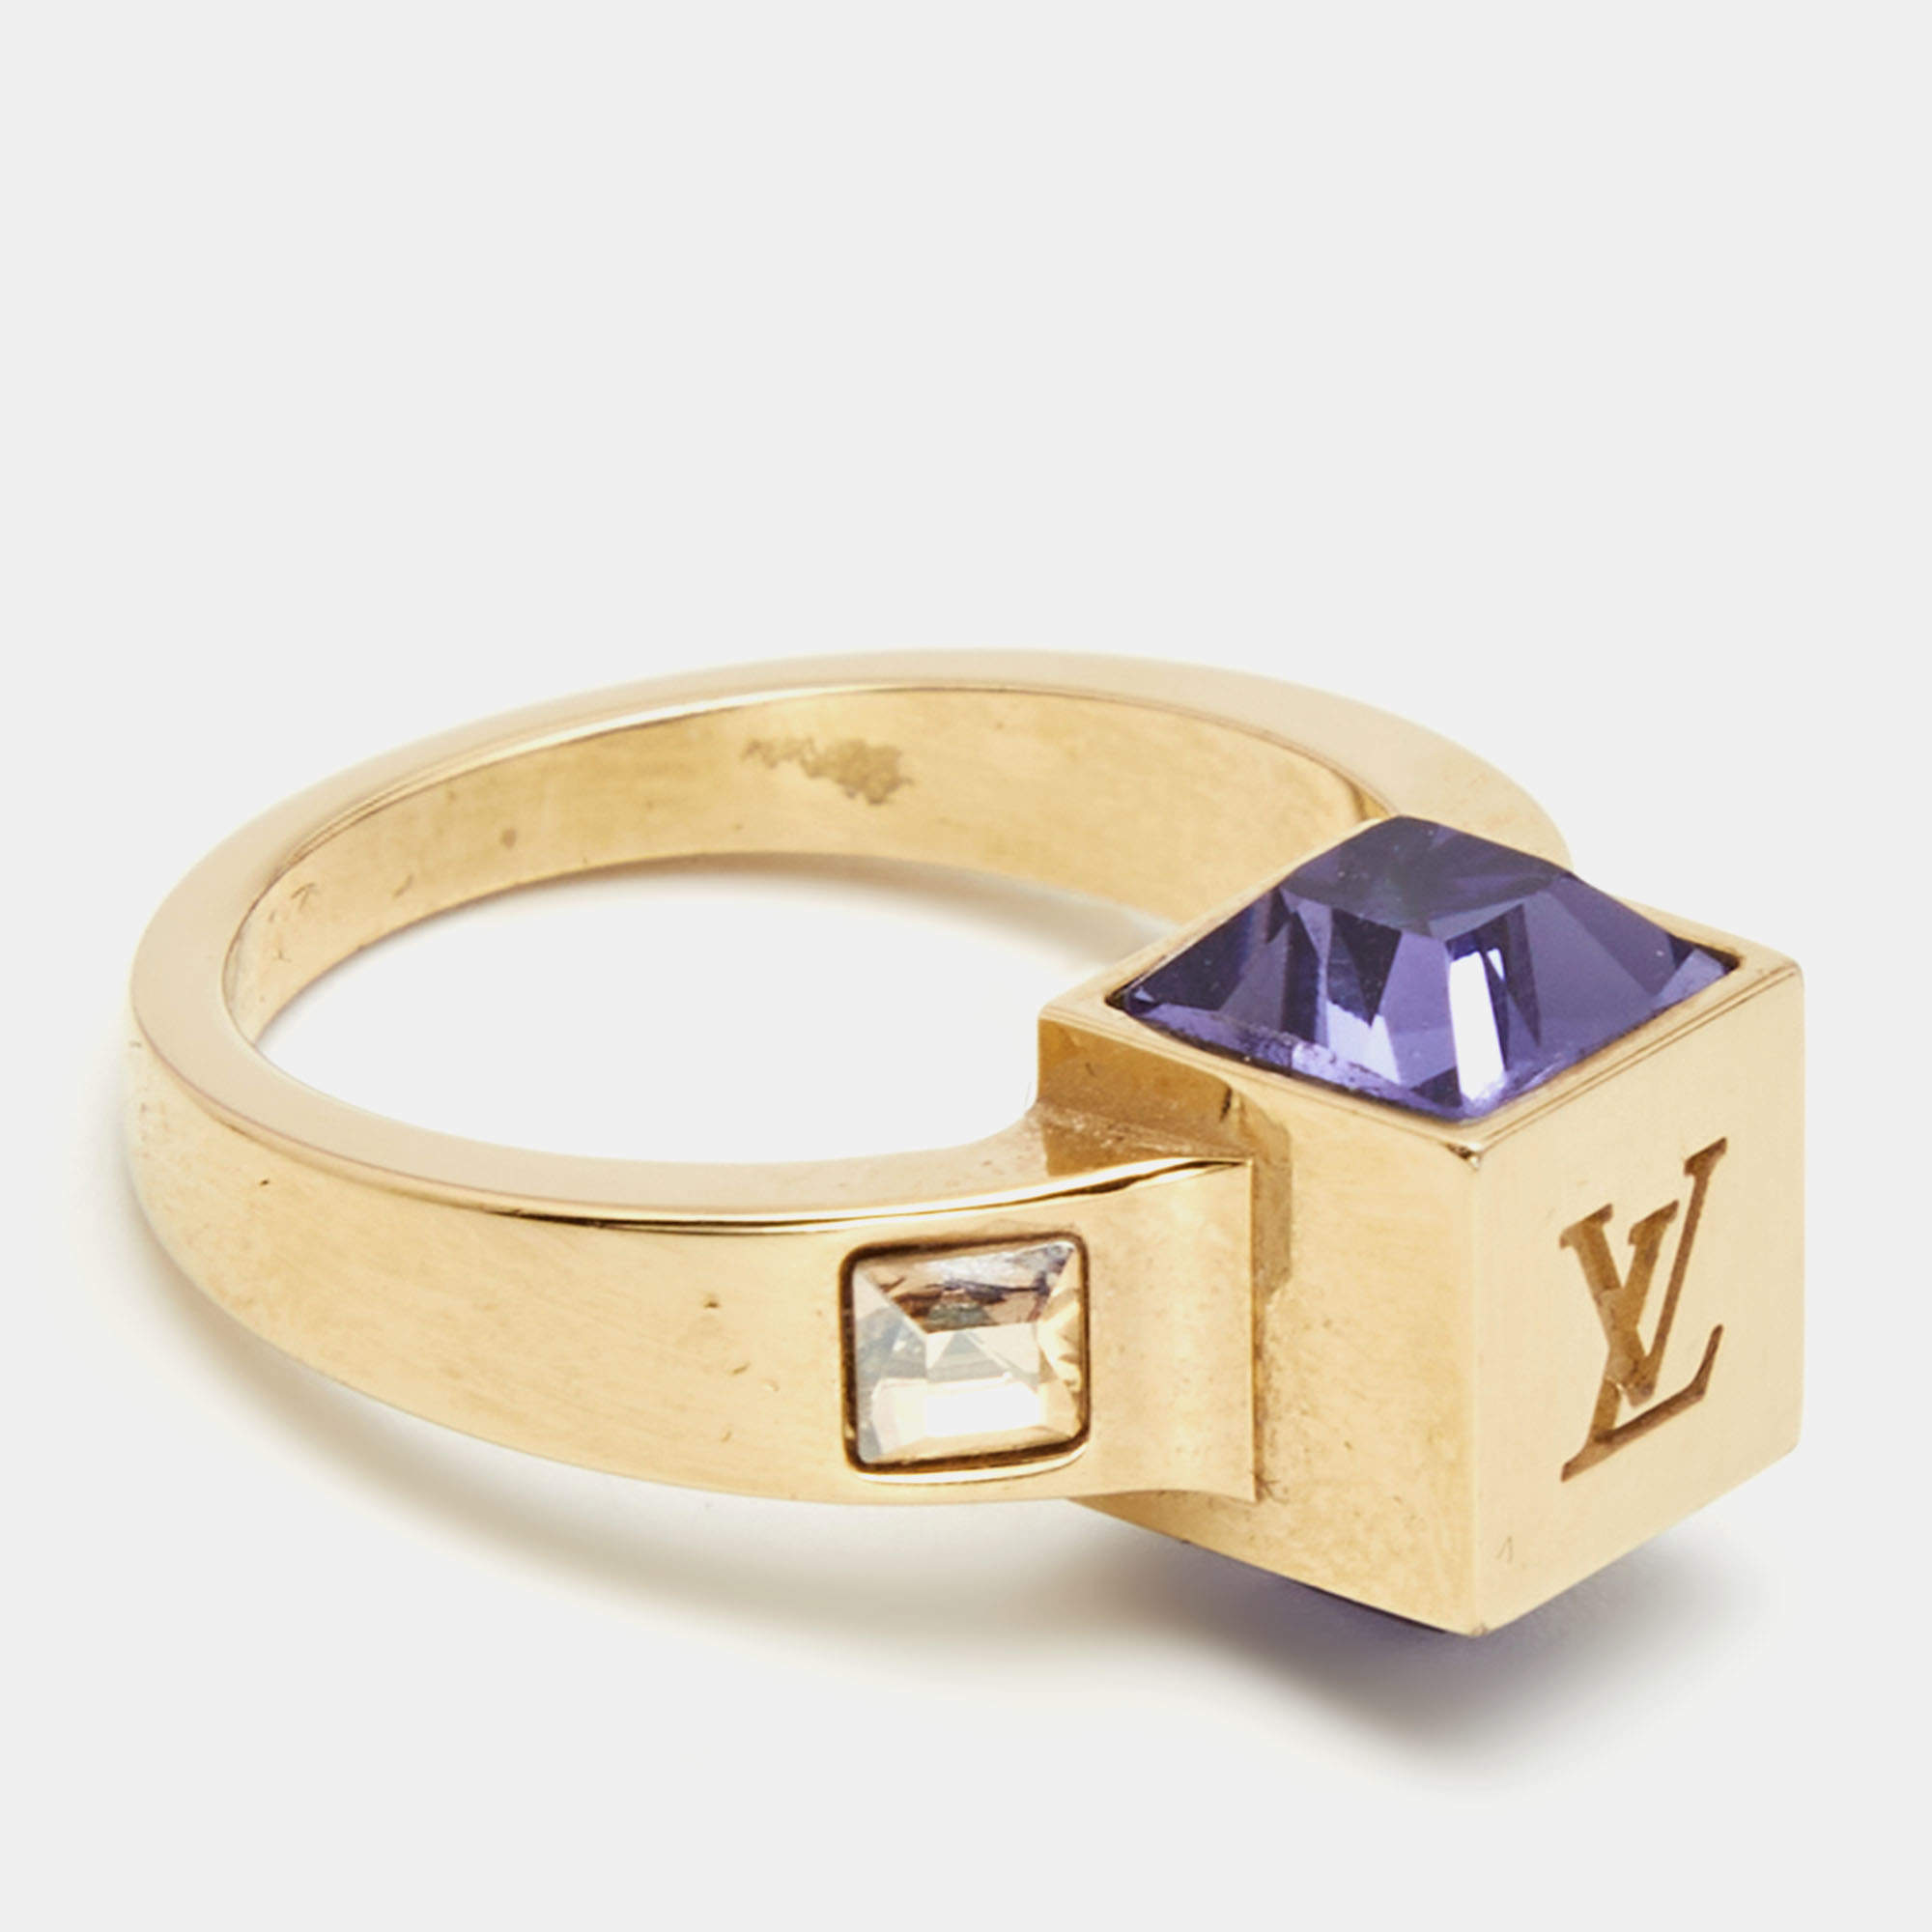 LOUIS VUITTON Gamble Ring Size S Gold-Plated Pink Color Stone M66824 62YA765